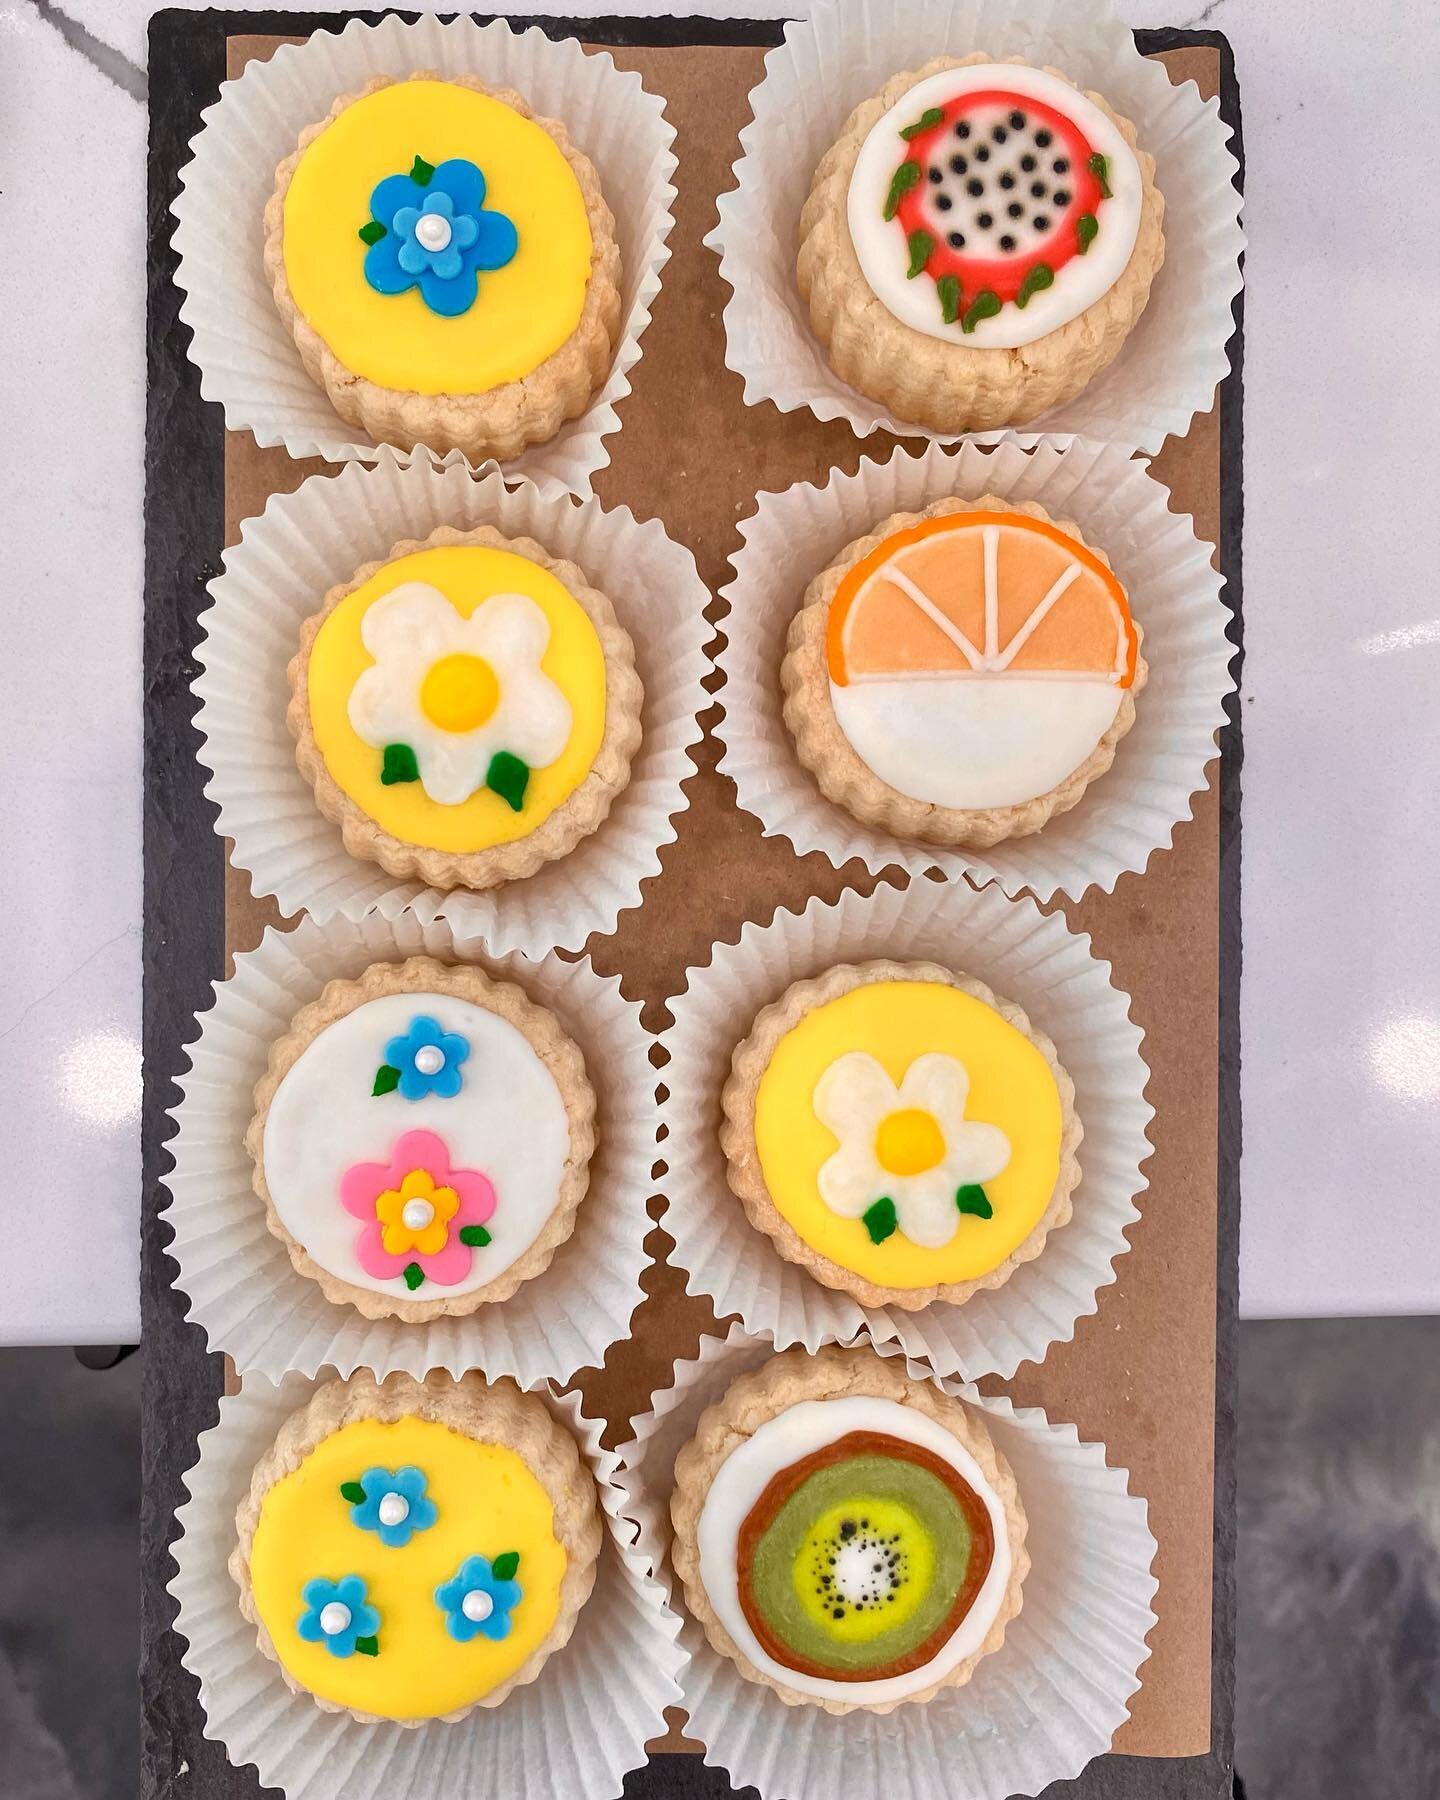 Darling Summer shortbread designs. Call to customize your own box!